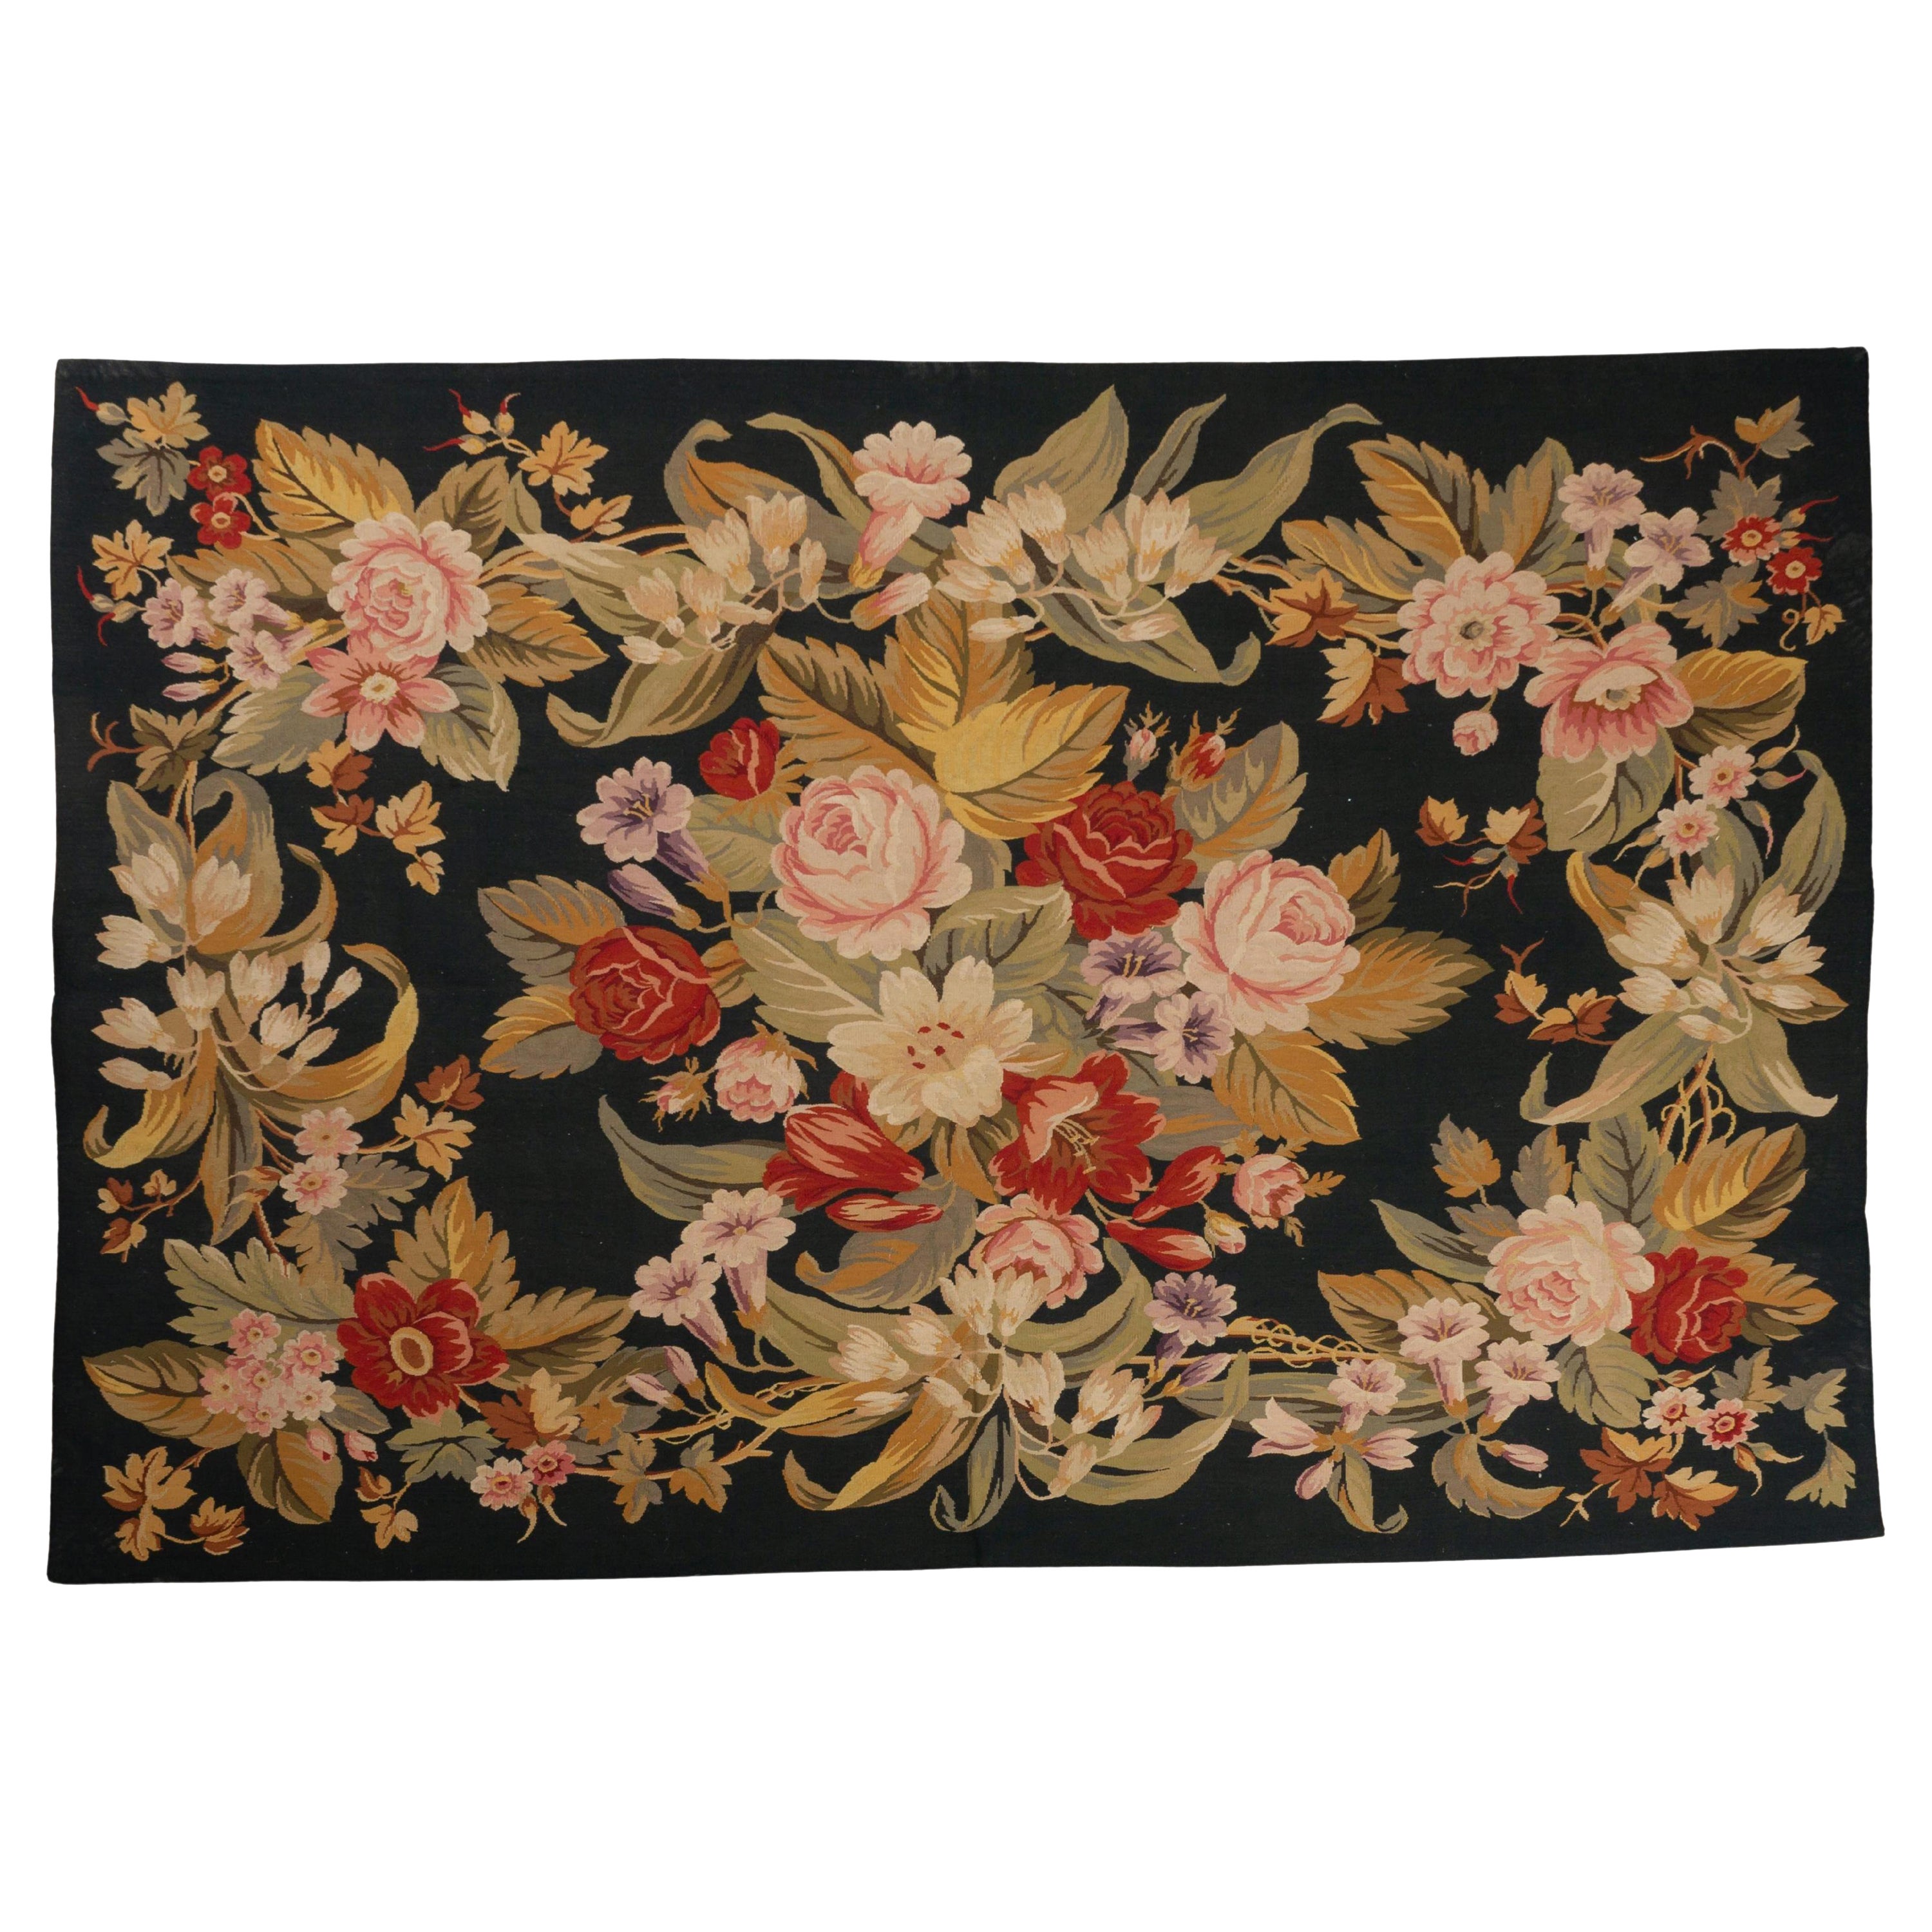 Aubusson  Carpet or Tapestry For Sale